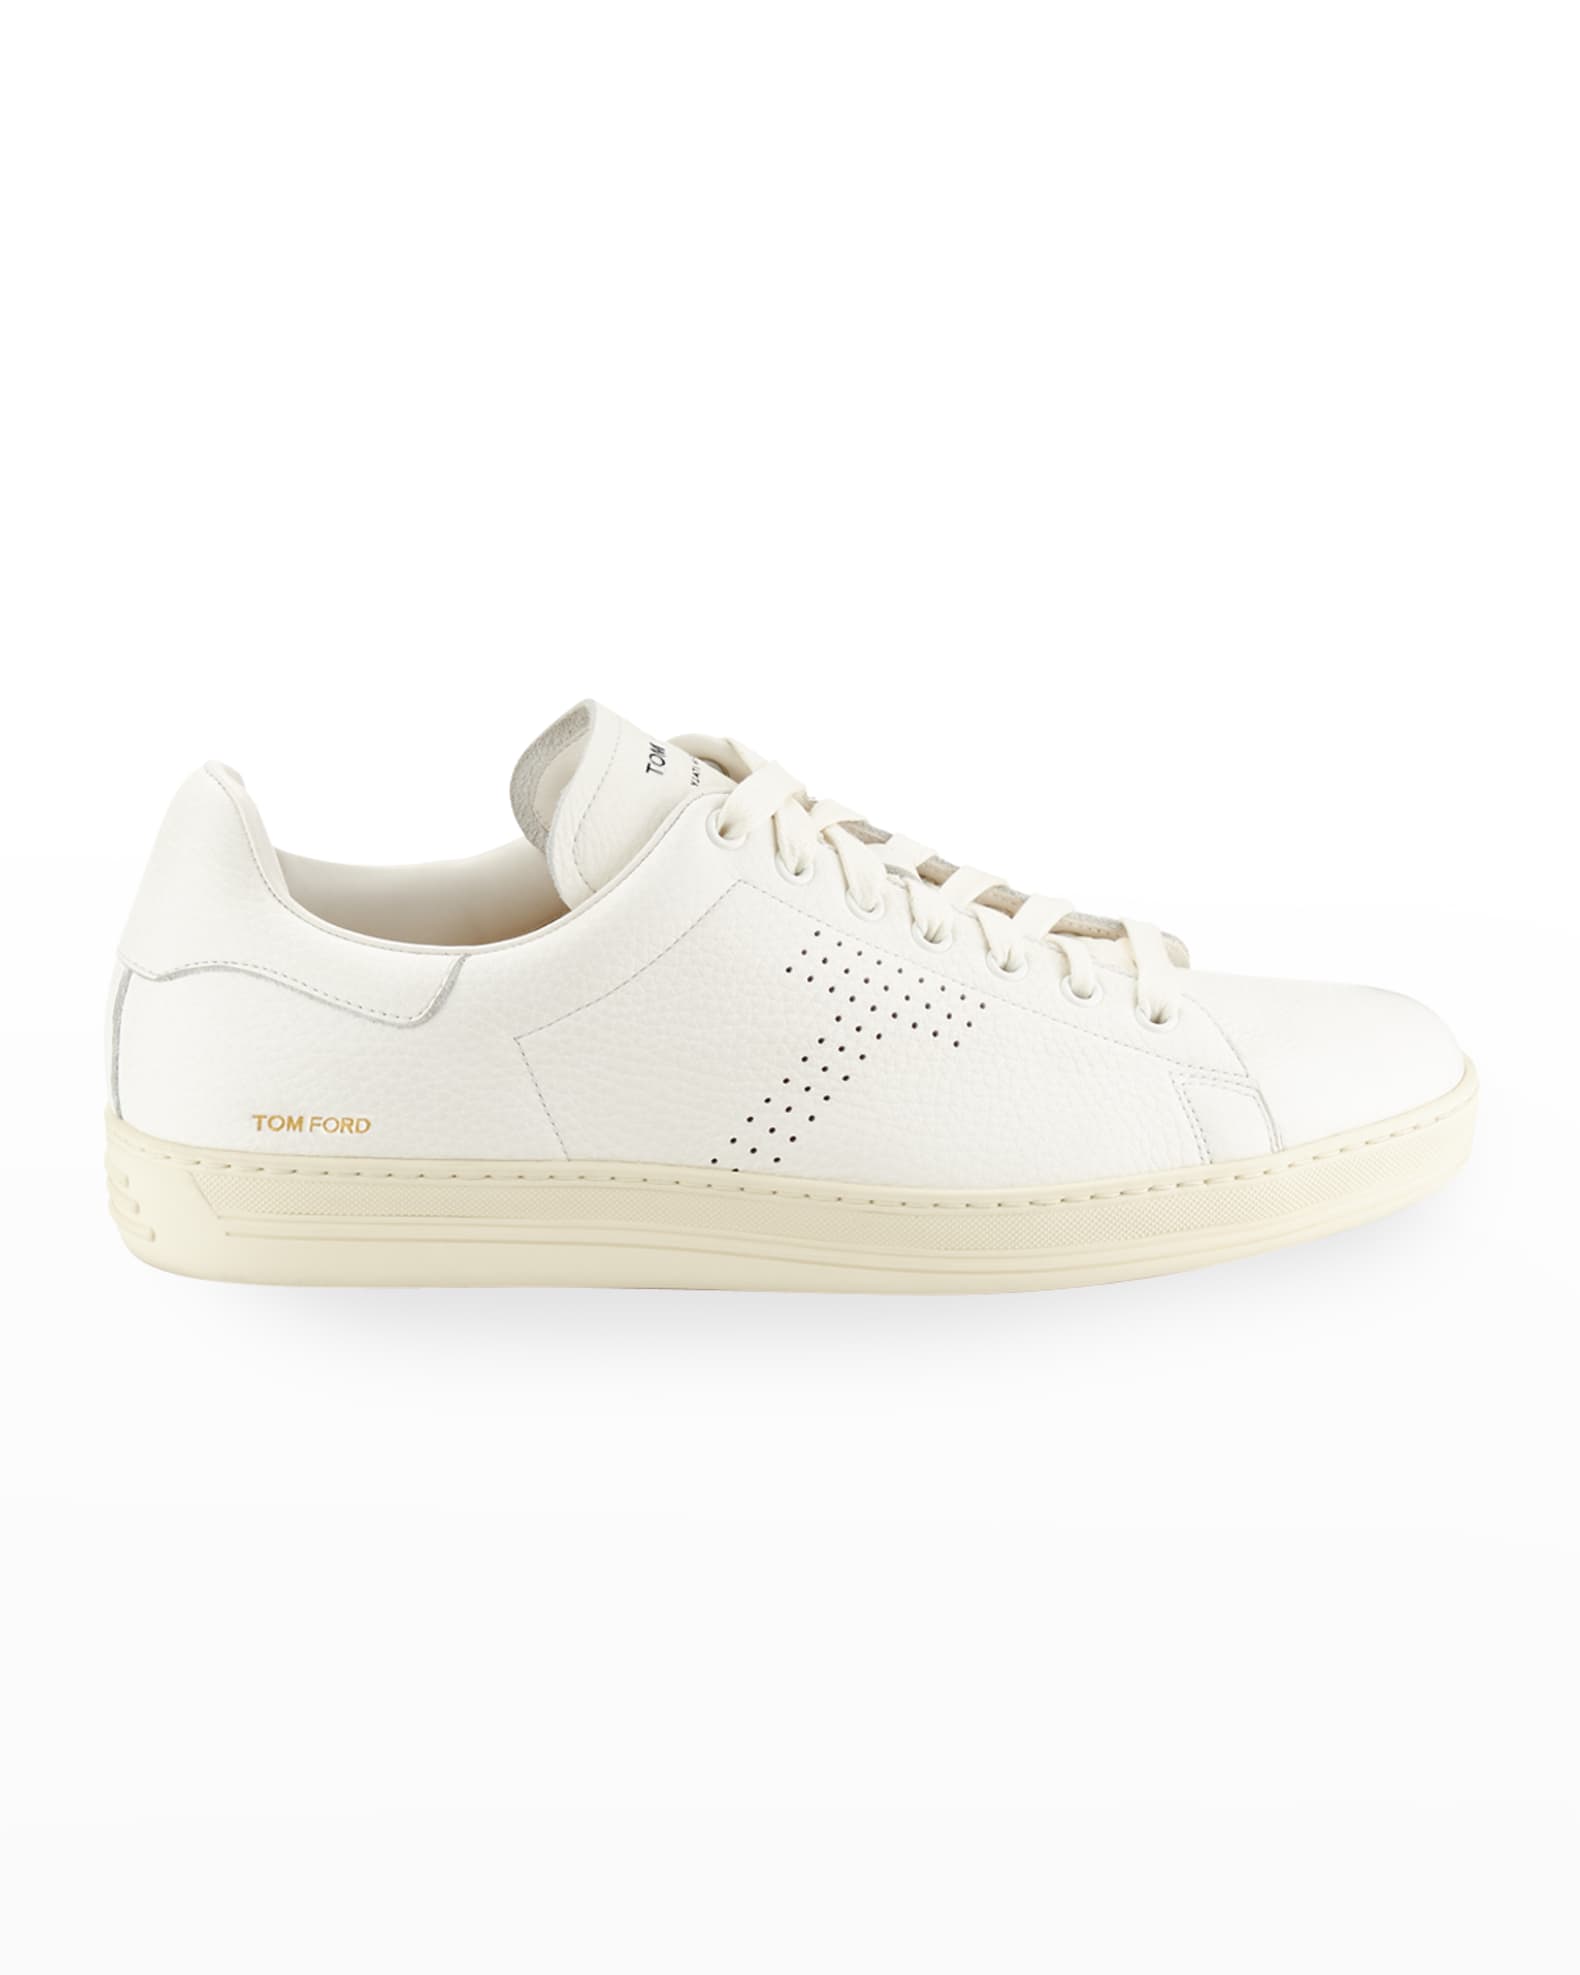 TOM FORD Men's Warwick Grained Leather Low-Top Sneakers, White | Neiman  Marcus